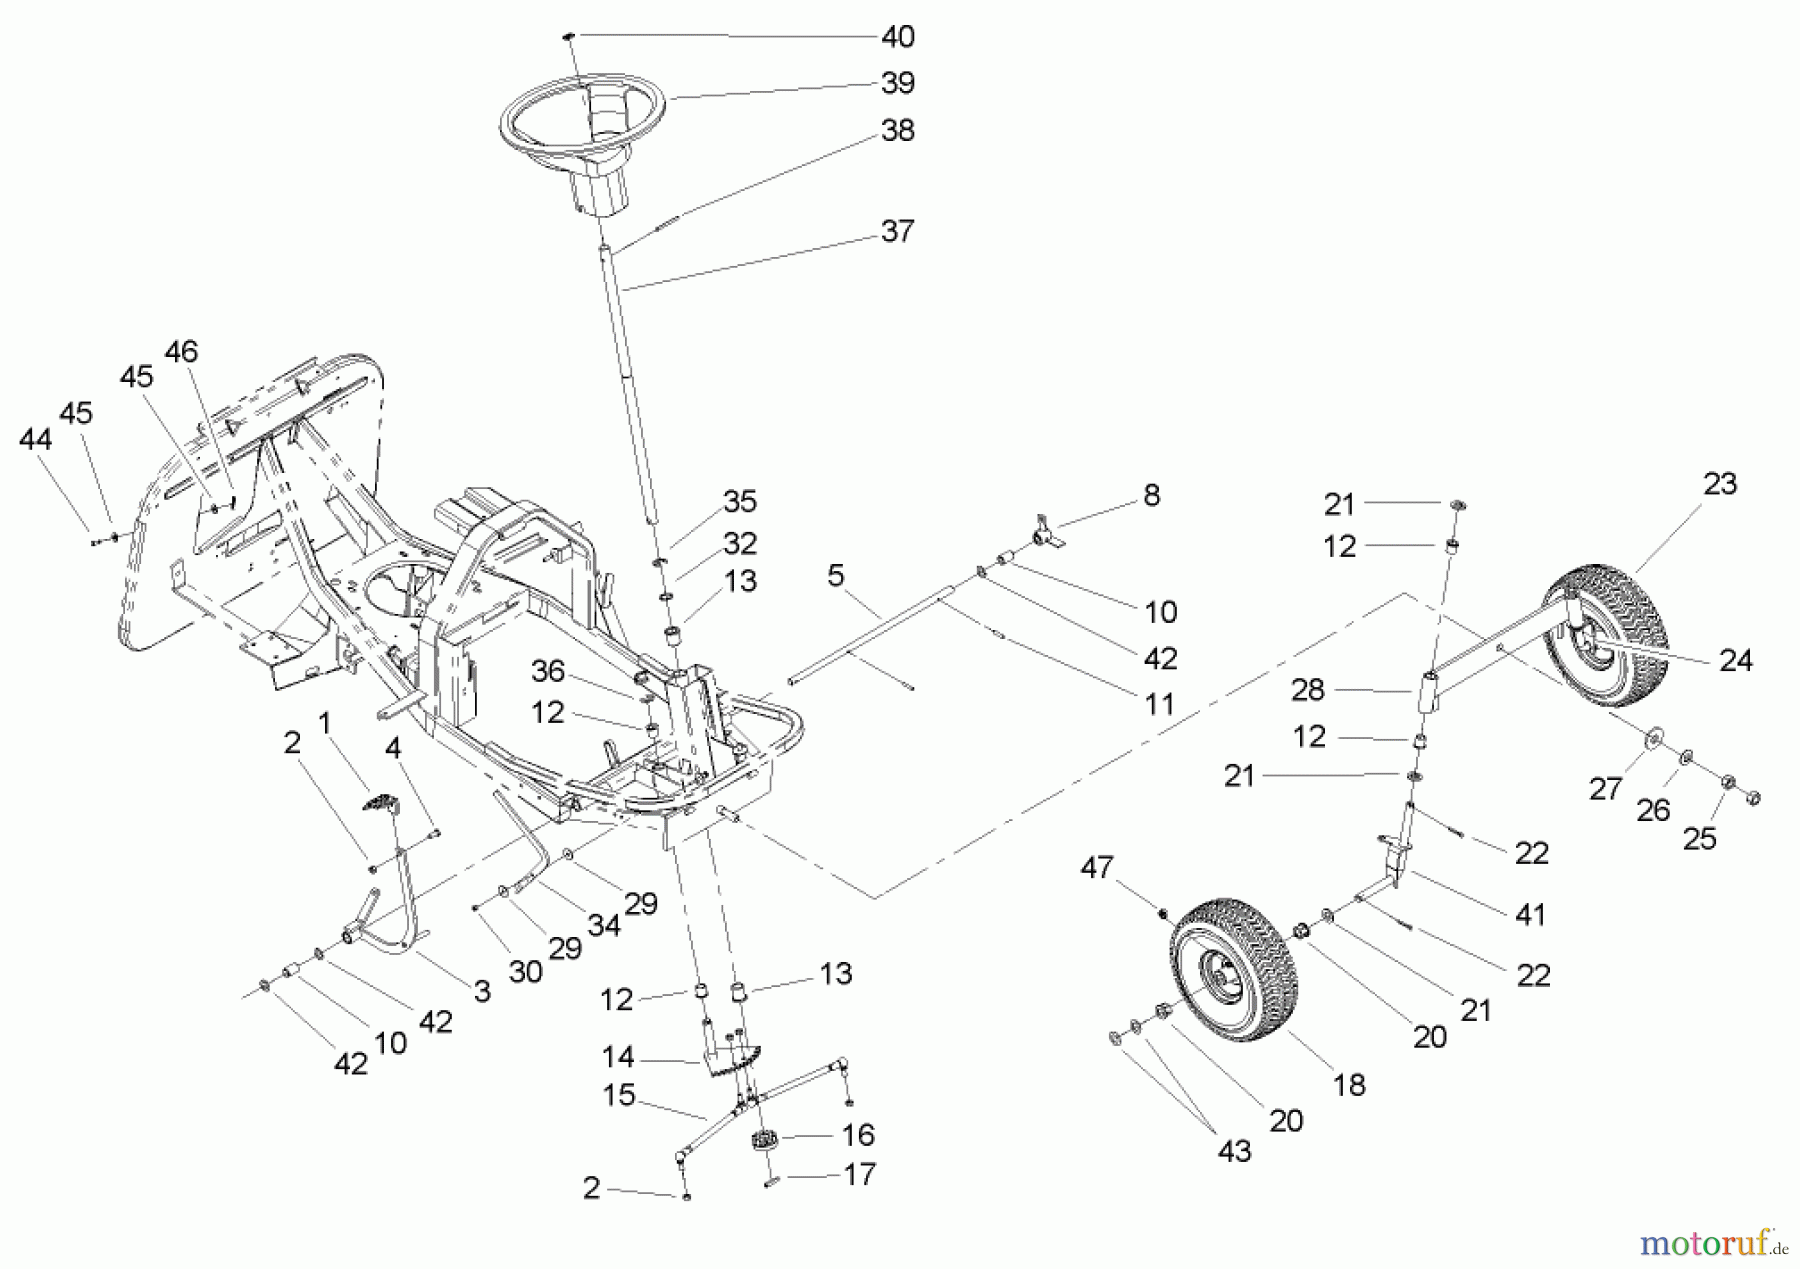  Toro Neu Mowers, Rear-Engine Rider 70185 (G132) - Toro G132 Rear-Engine Riding Mower, 2006 (260000001-260999999) FRONT AXLE AND STEERING ASSEMBLY